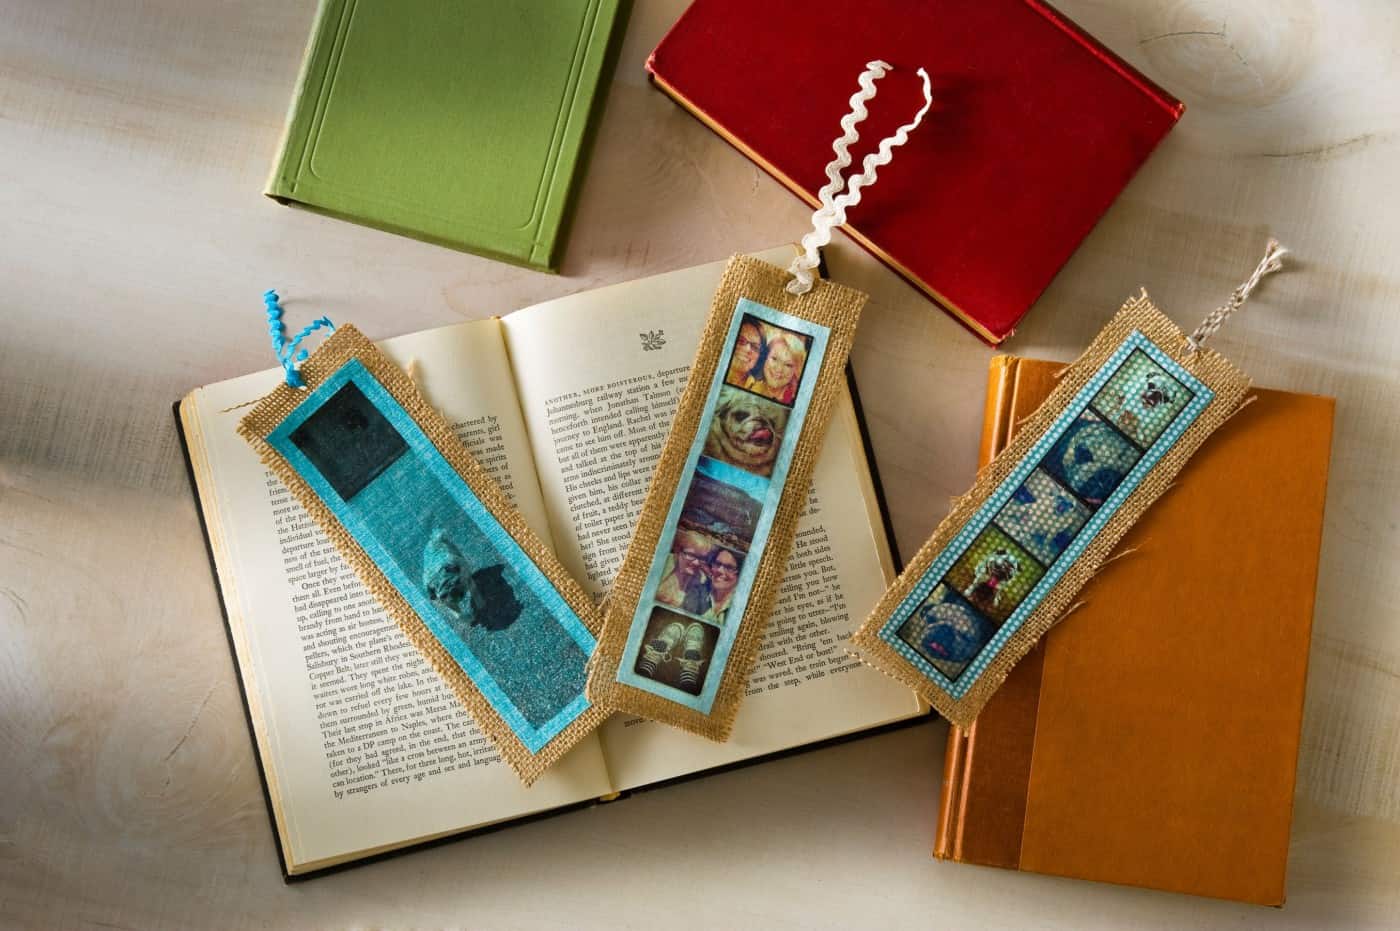 Make some personalized DIY bookmarks using your favorite Instagram photos! These are the perfect gift idea - and so easy to do. 